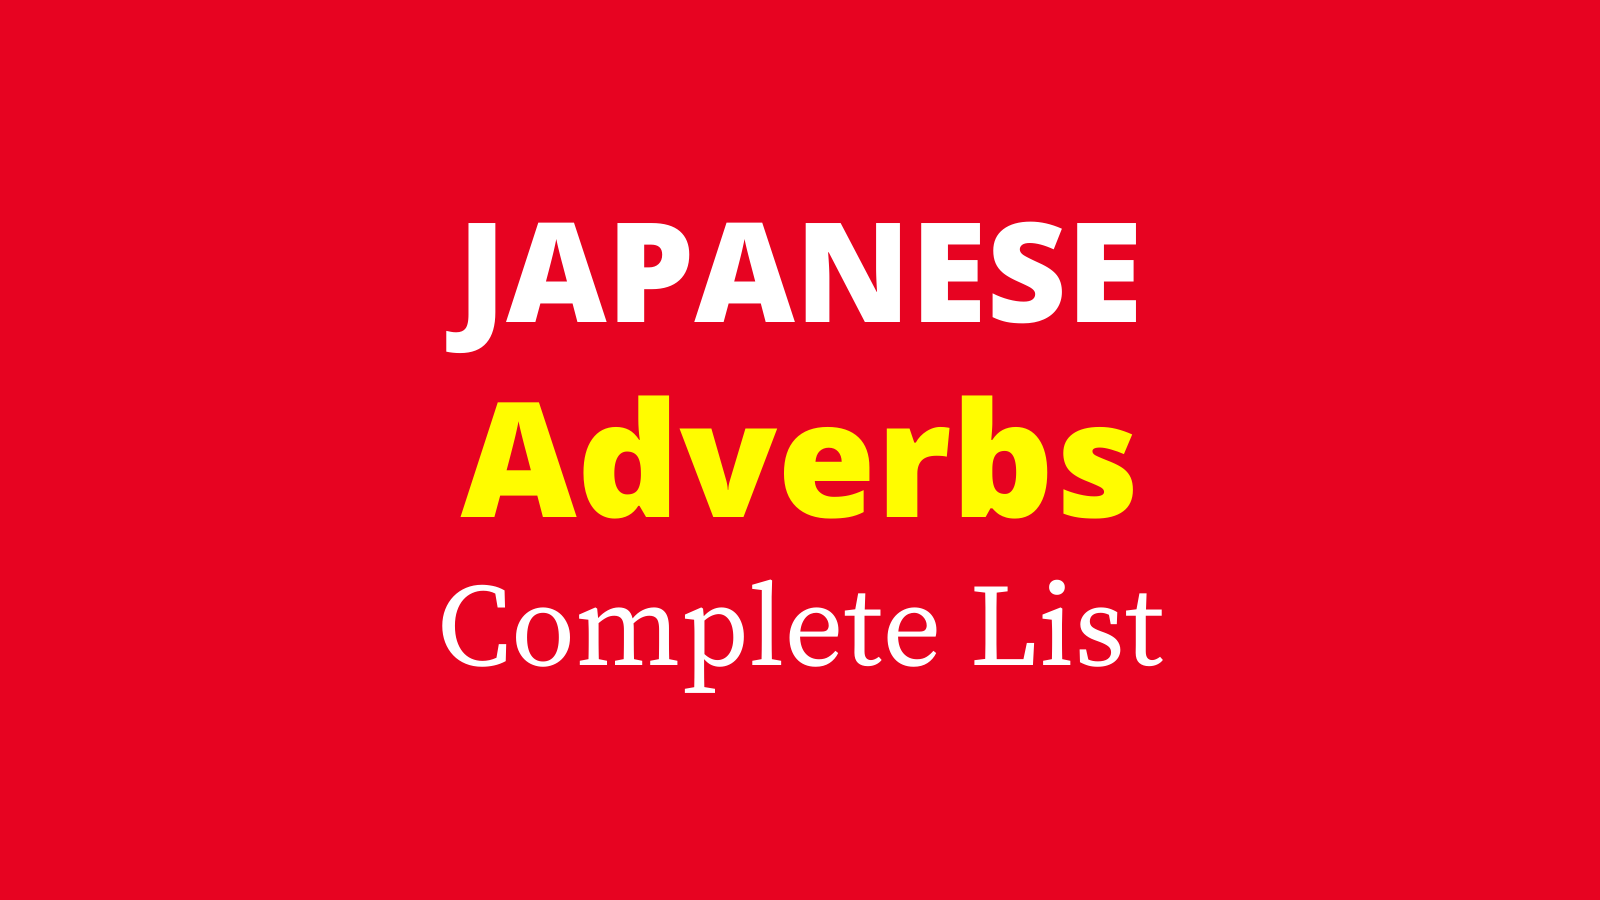 list of adverbs in alphabetical order